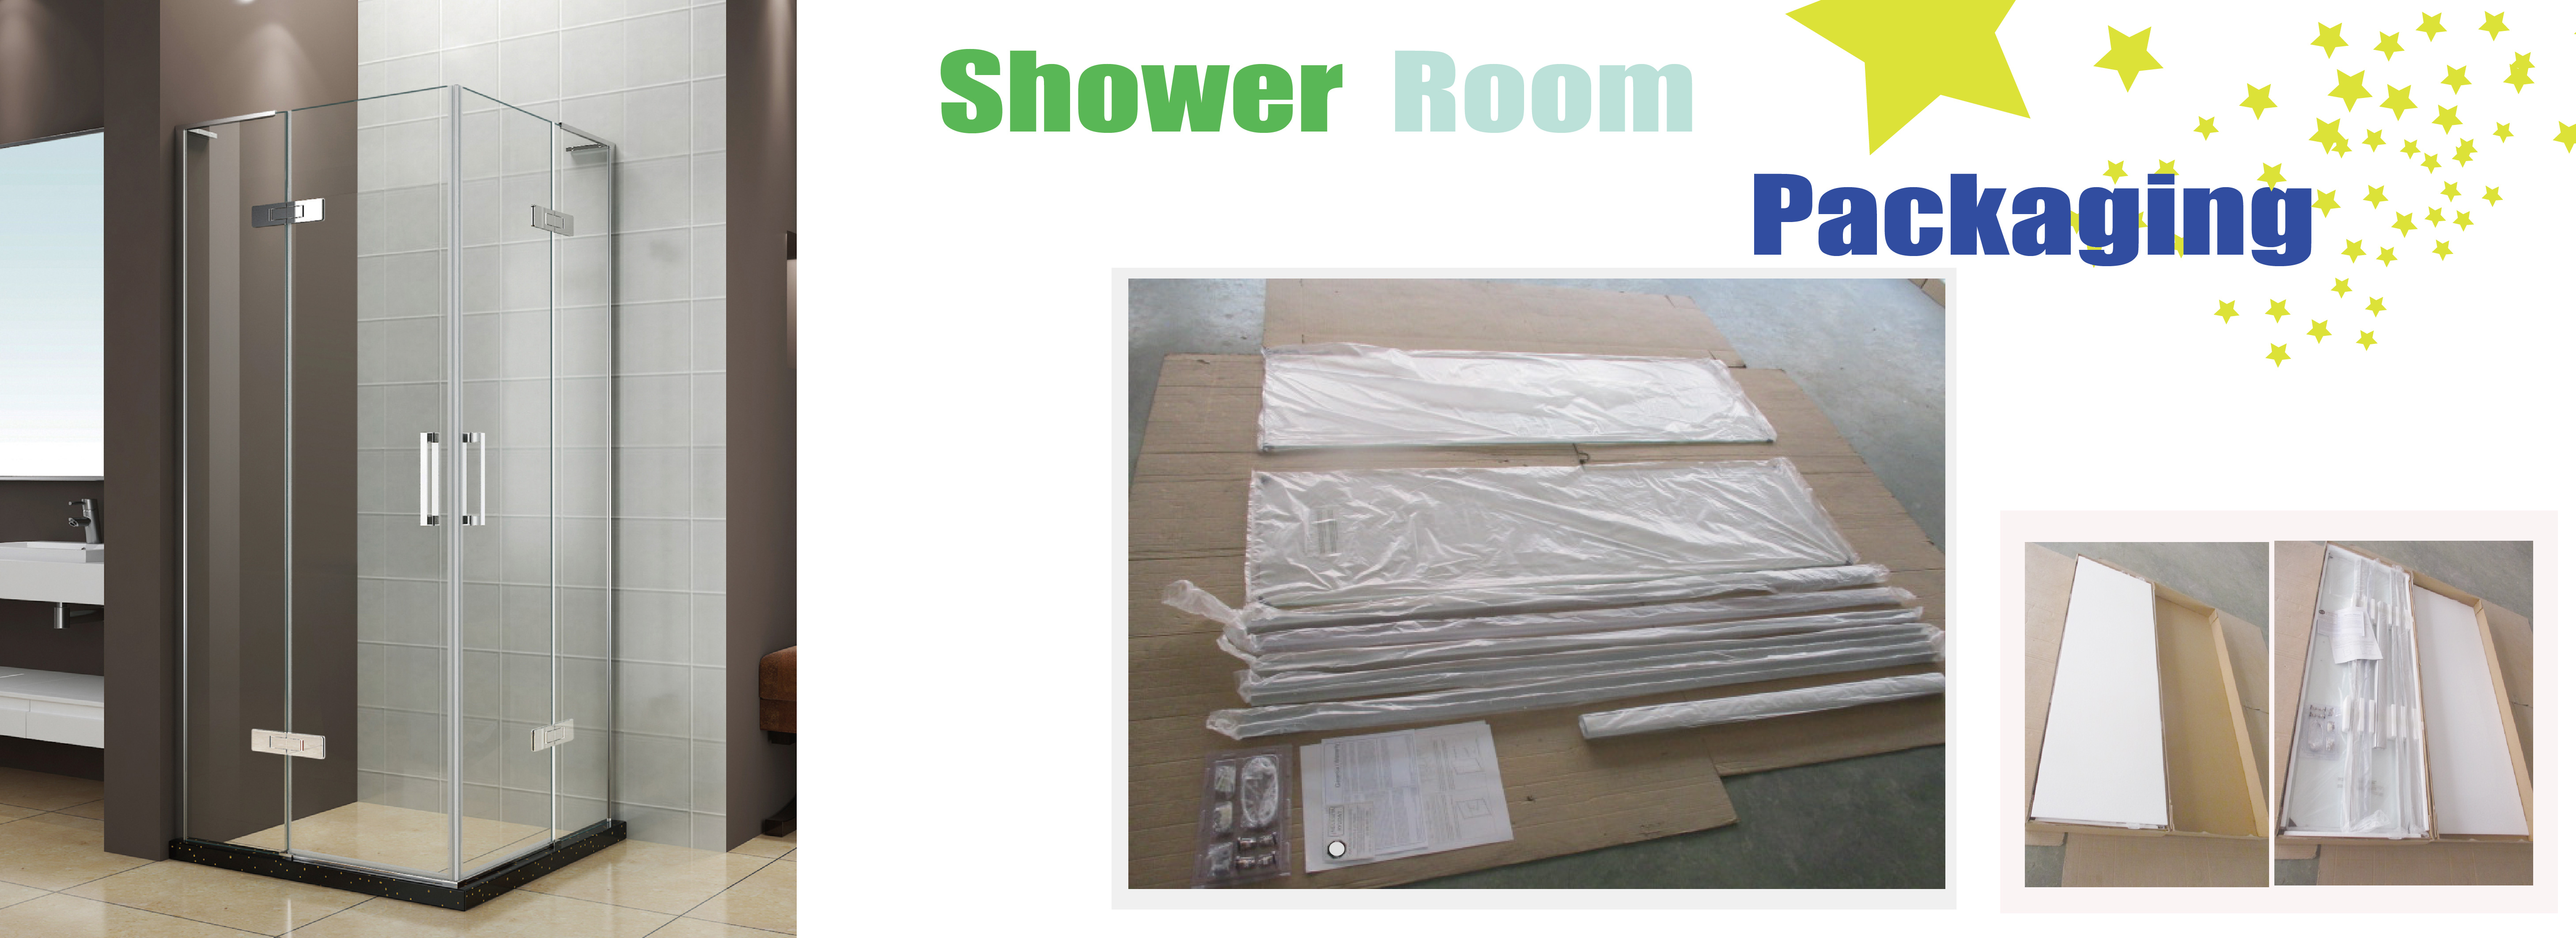 Shower Package Entop Style Package Bathroom Cbainet Led Mirror Shower Room